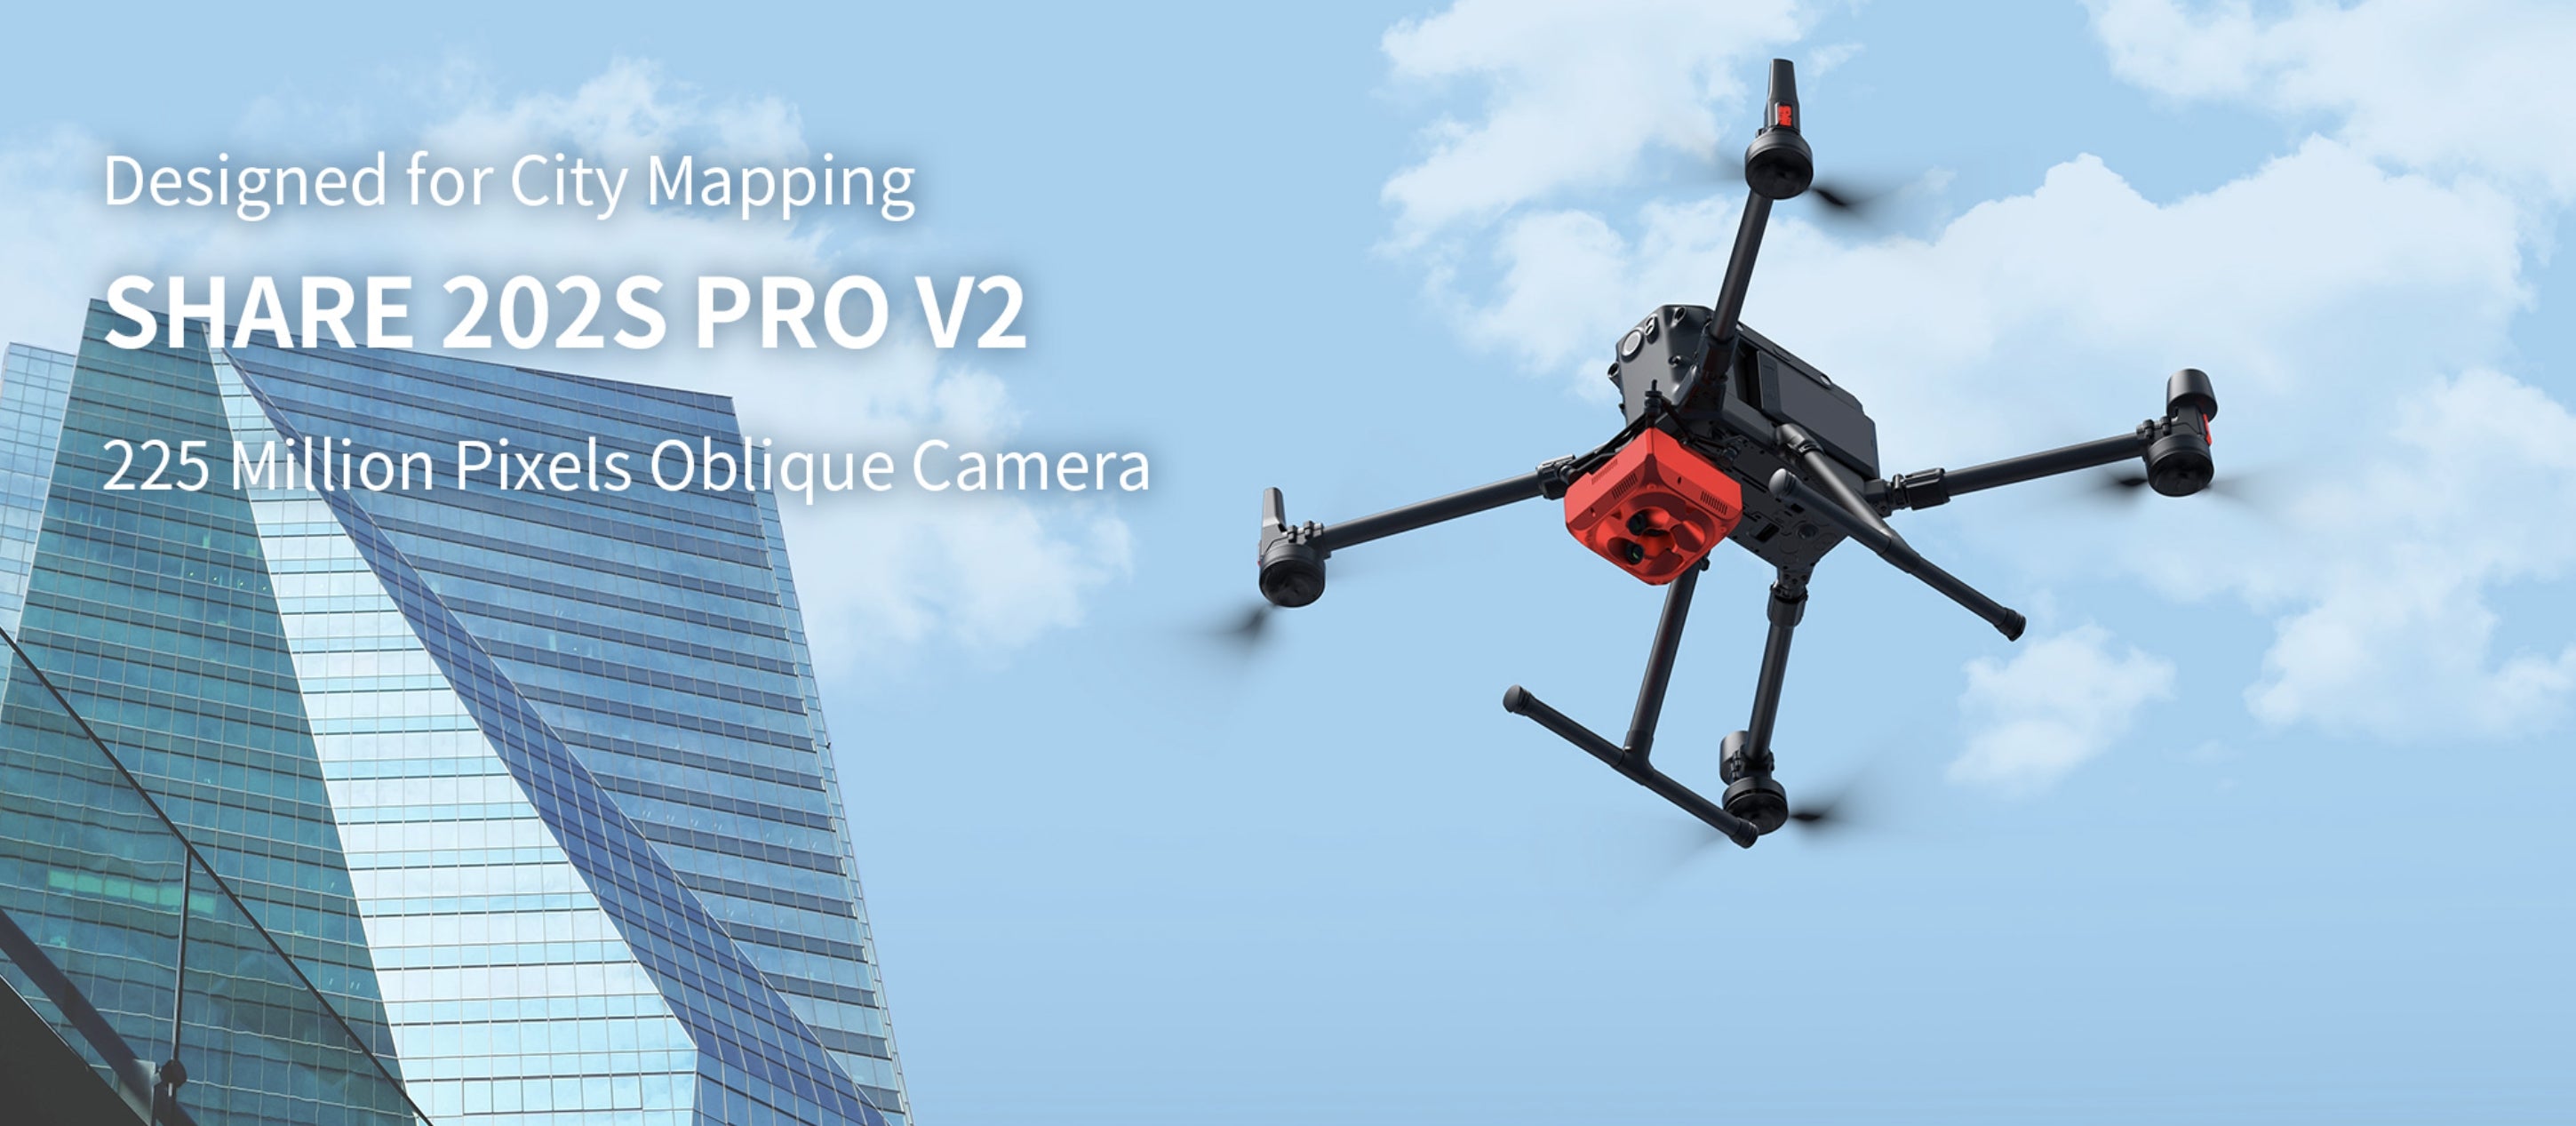 SHARE 202S Pro V2, High-resolution camera for city mapping with 225 million pixels.